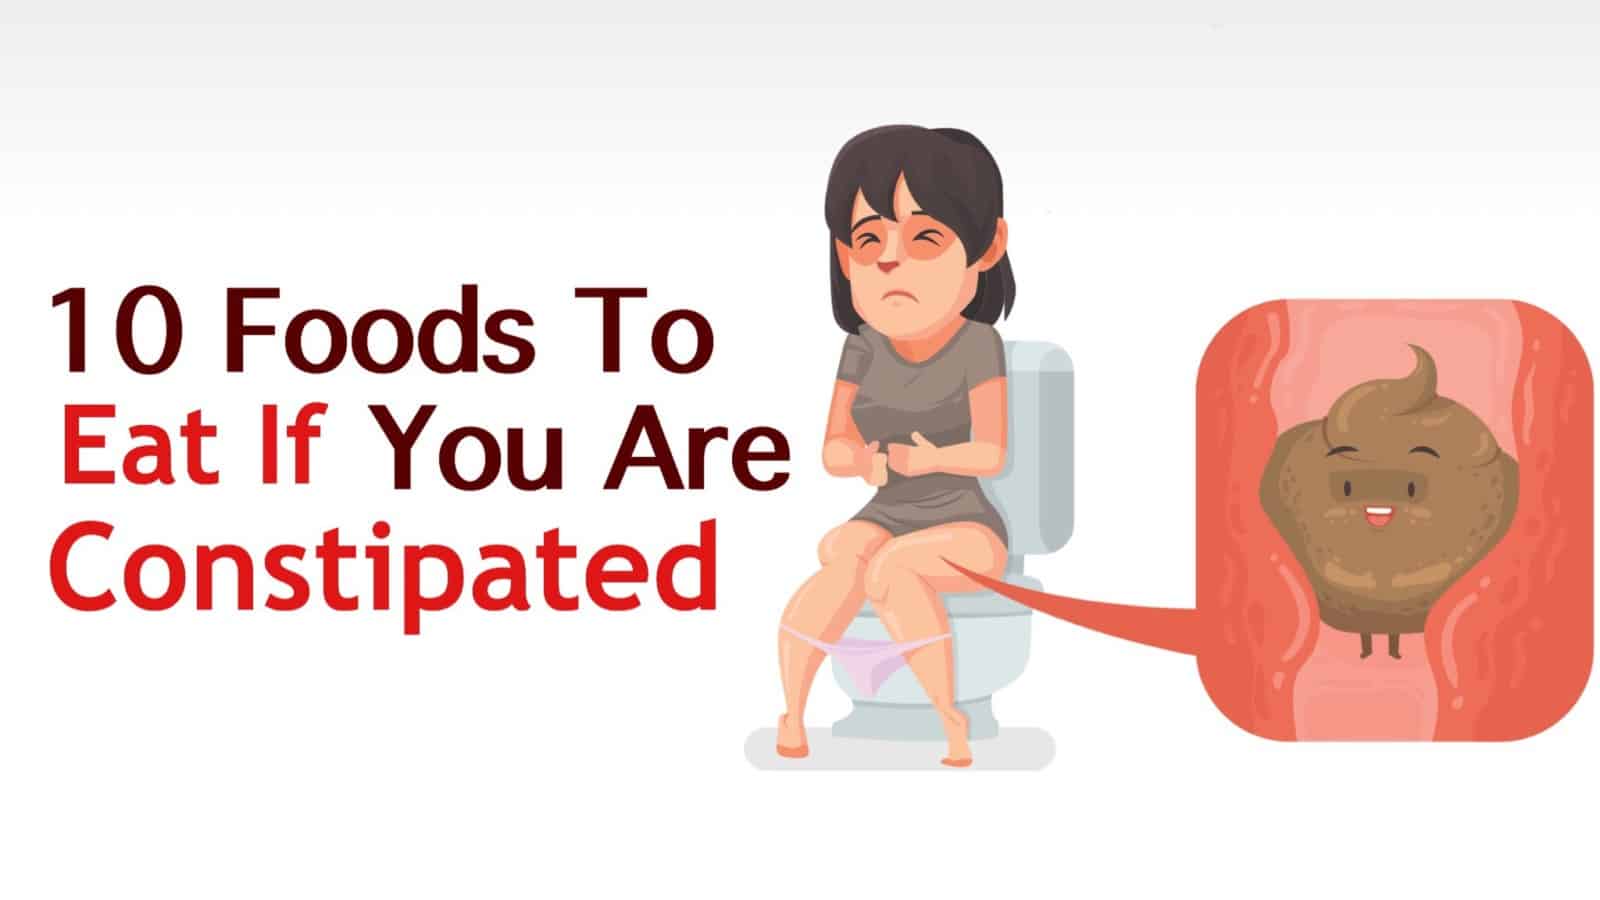 10 Foods To Eat If You Are Constipated